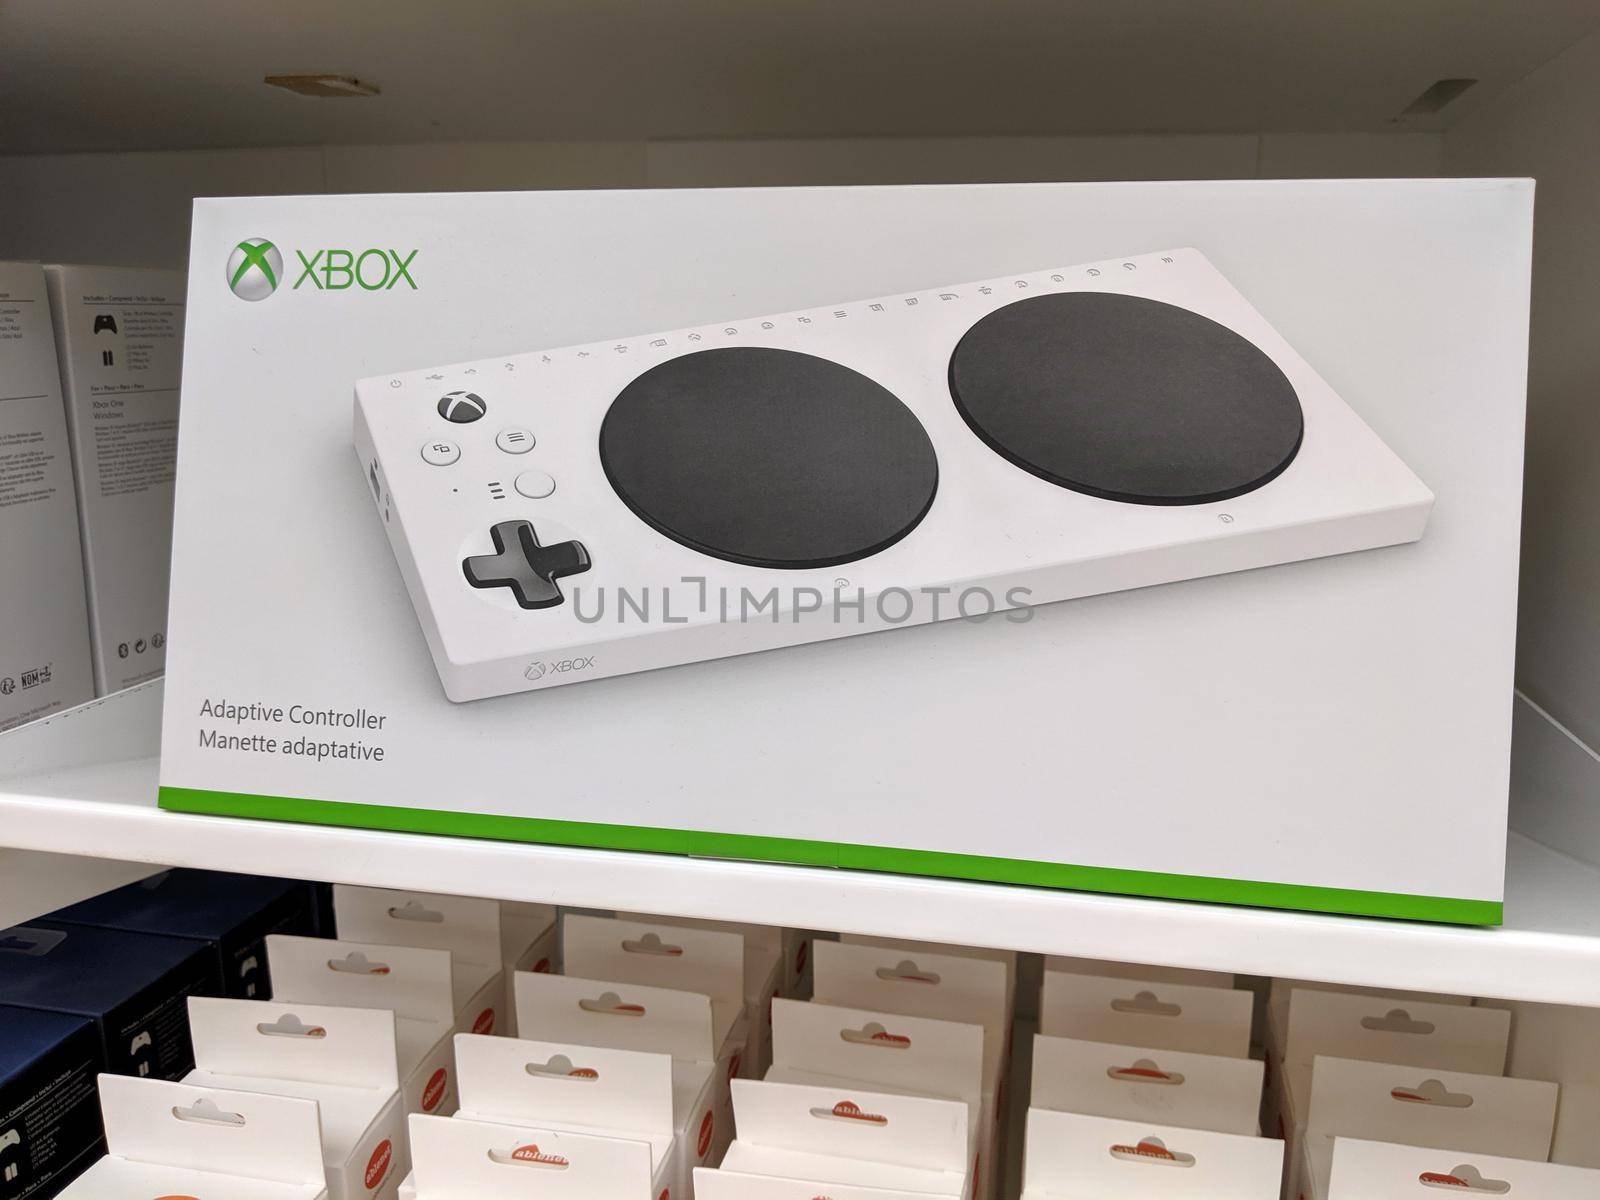 Honolulu - August 30, 2019: Xbox Adaptive Controller for sale inside Microsoft store in Ala Moana Mall.  The controller was designed for people with disabilities to help make user input for video games more accessible.